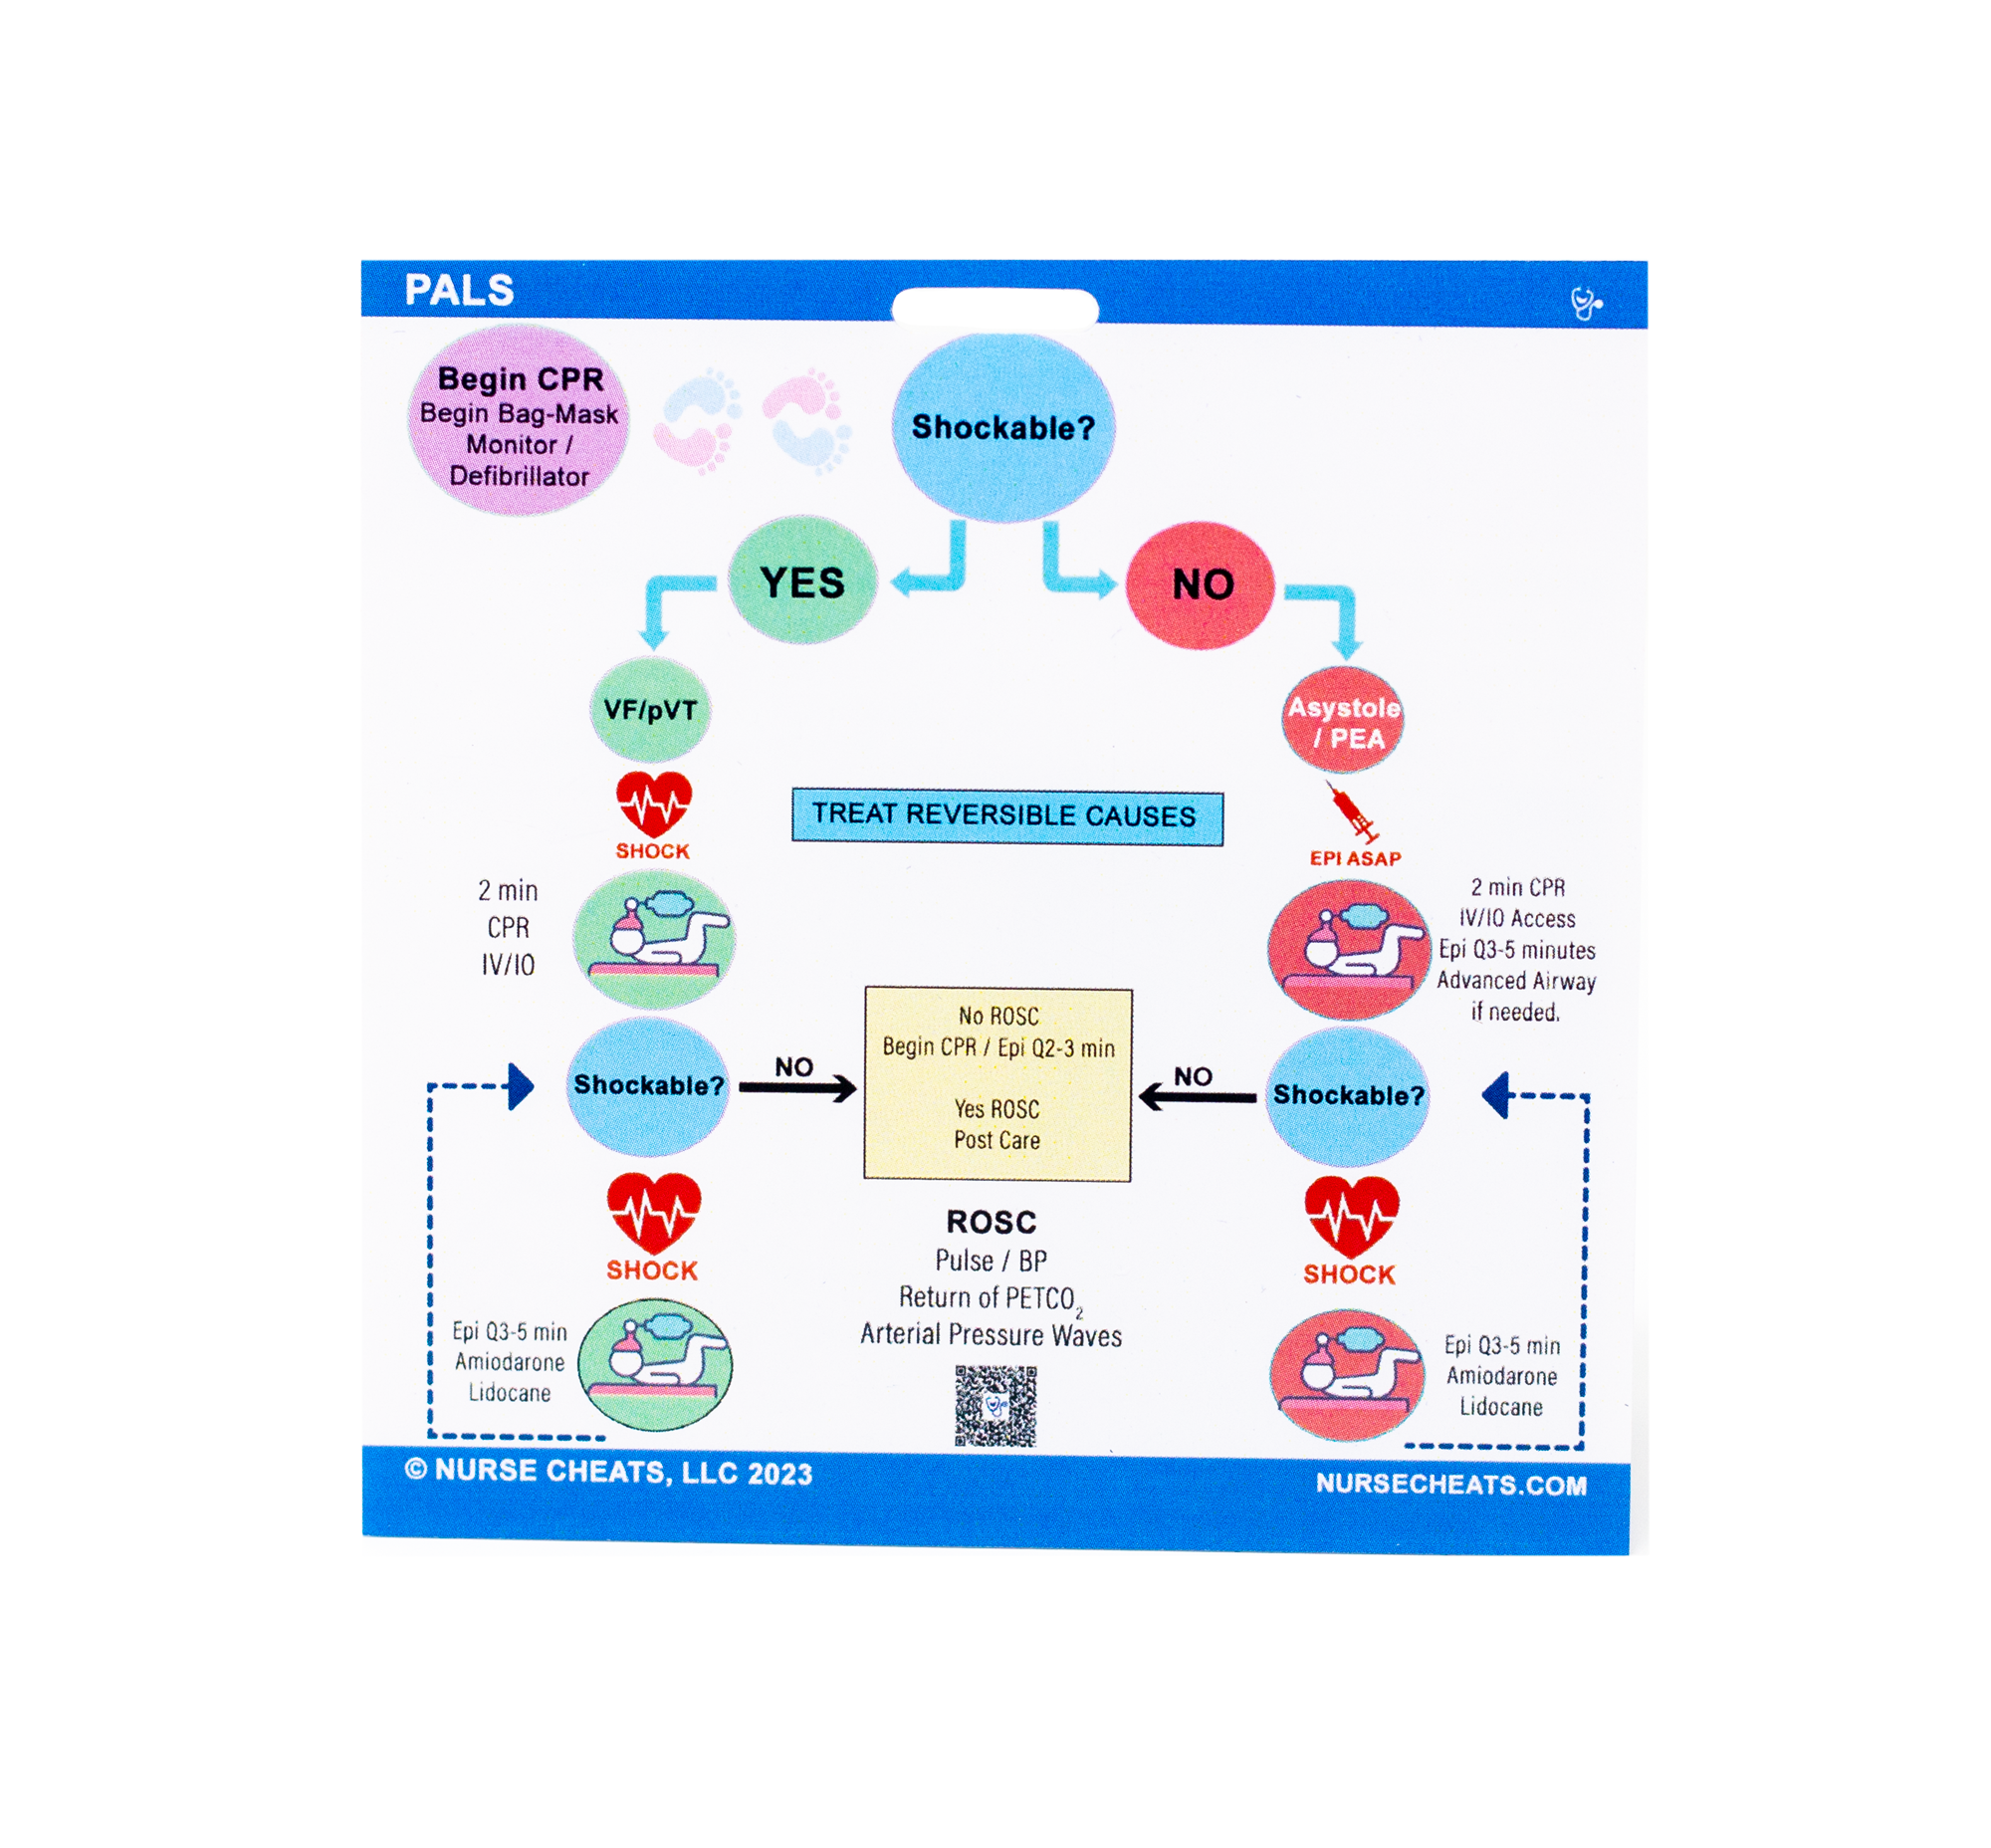 Our PALS algorithm badge has the information you need for a pediatric code. On the front is the algorithm. On the back are meds, joules, AED instructions, pad placement, and CPR.